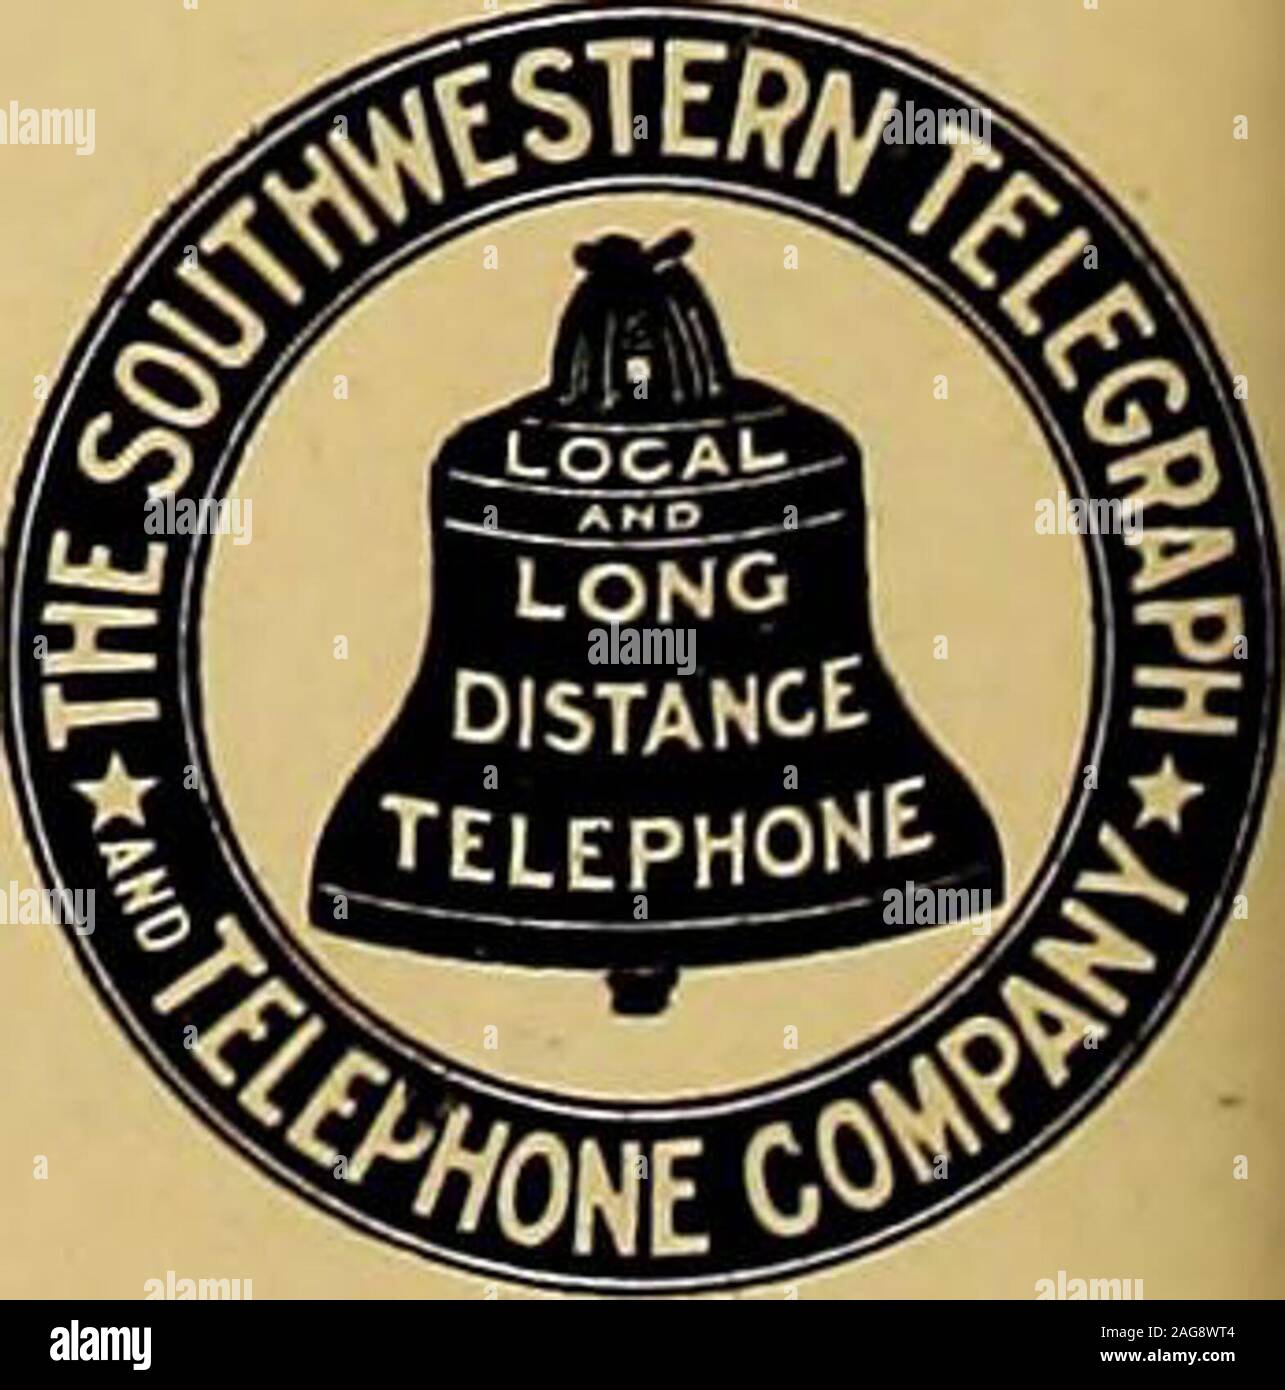 Dallas Texas City Directory Of Greater Dallas 47 Western Electric Co Dallas Texas We Manufacture Telephone Apparatus And Equipmenttelephone Cables Blue Bell Batteriespower Apparatus And Switchboardsarc Lamps And Arc Lamp Equipmentsfan